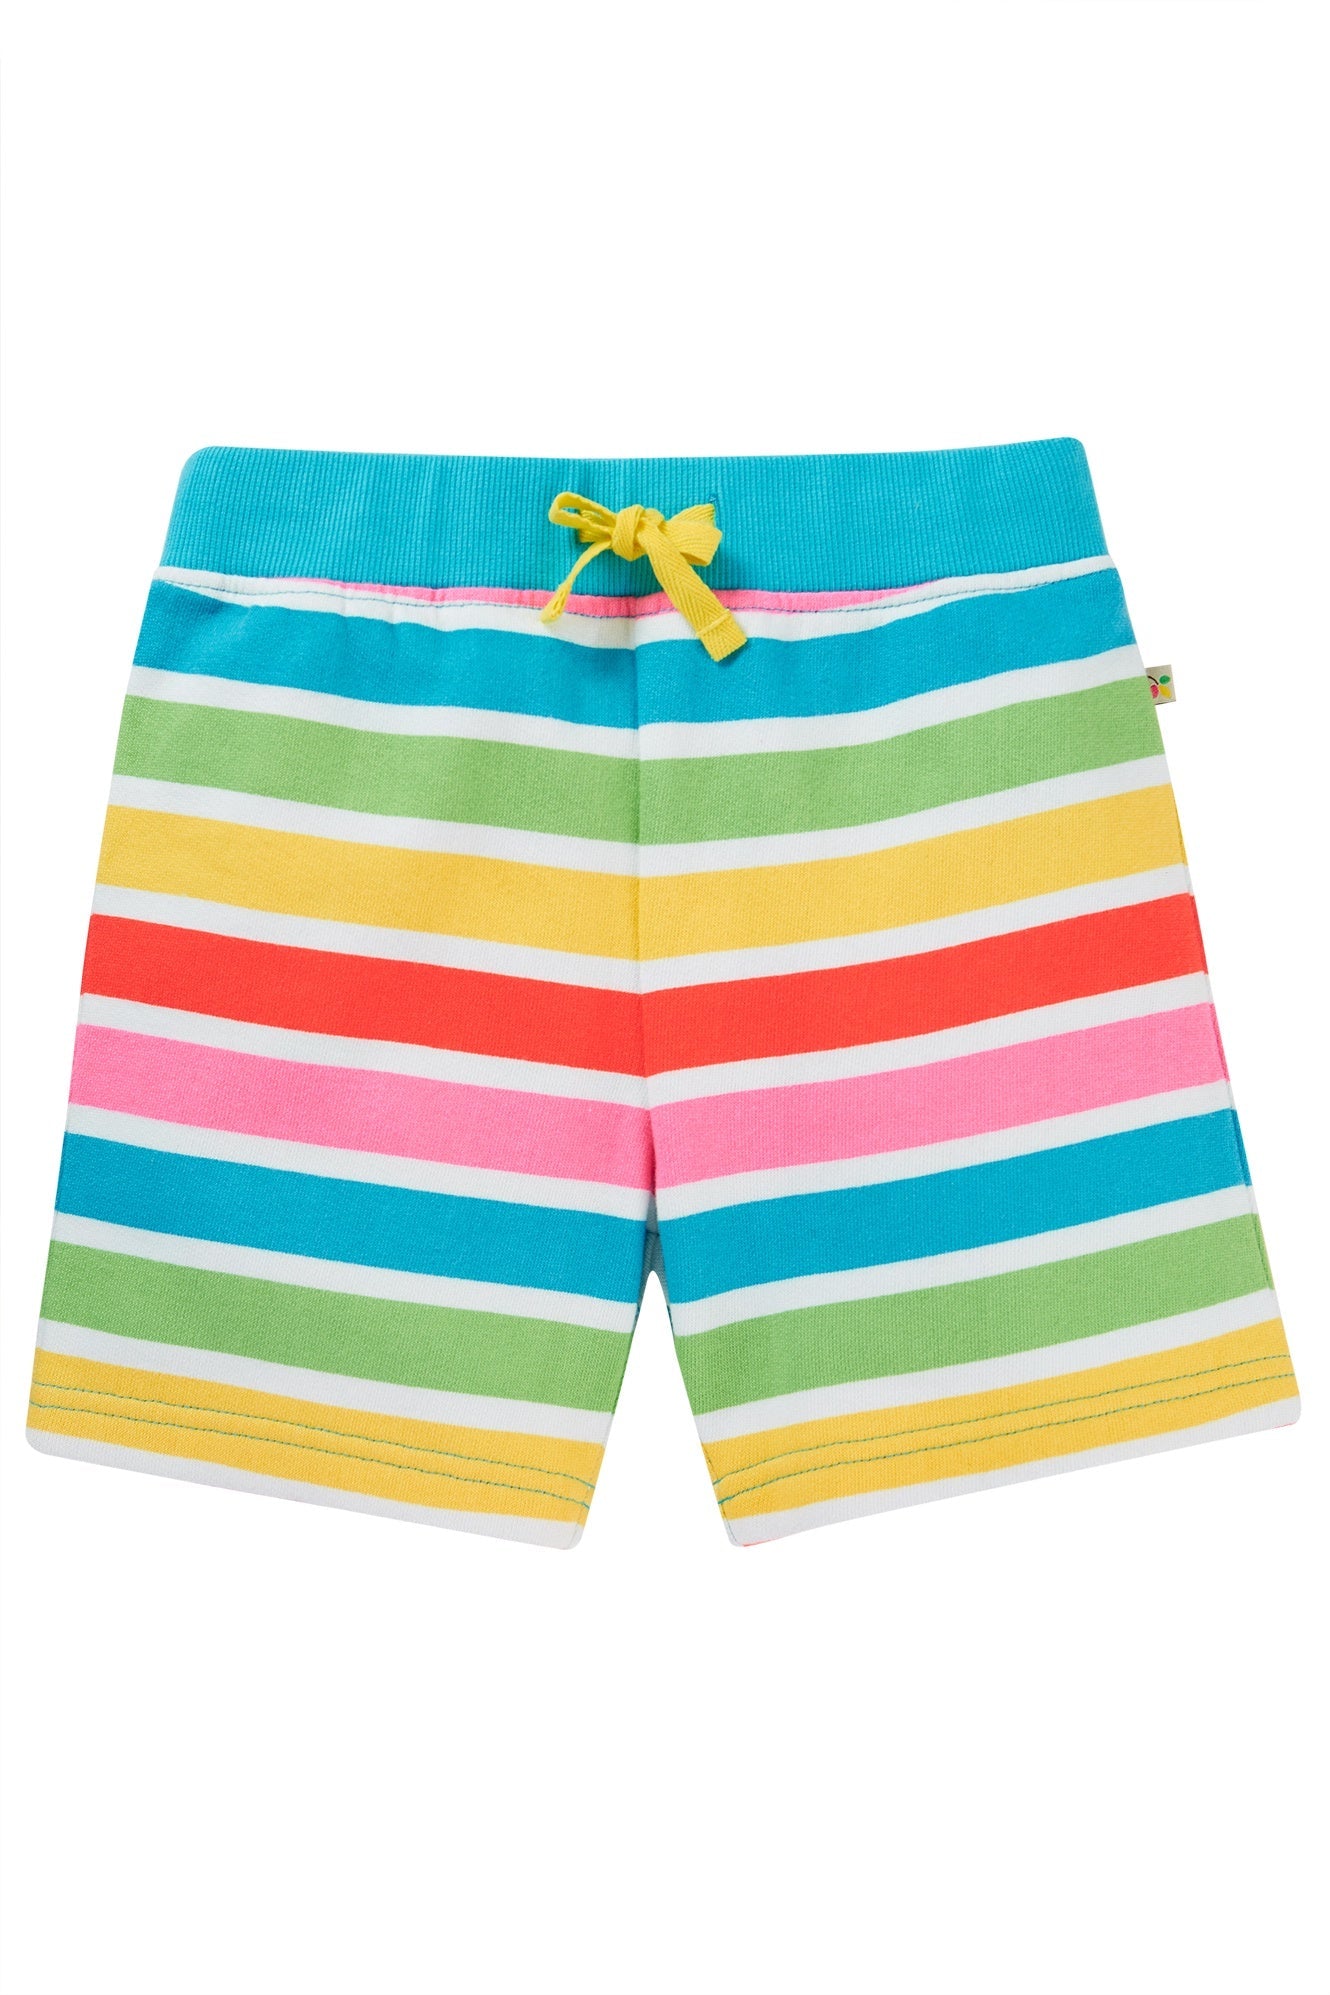 Frugi Switch Sydney Shorts in Soft White Rainbow-Kids-Ohh! By Gum - Shop Sustainable